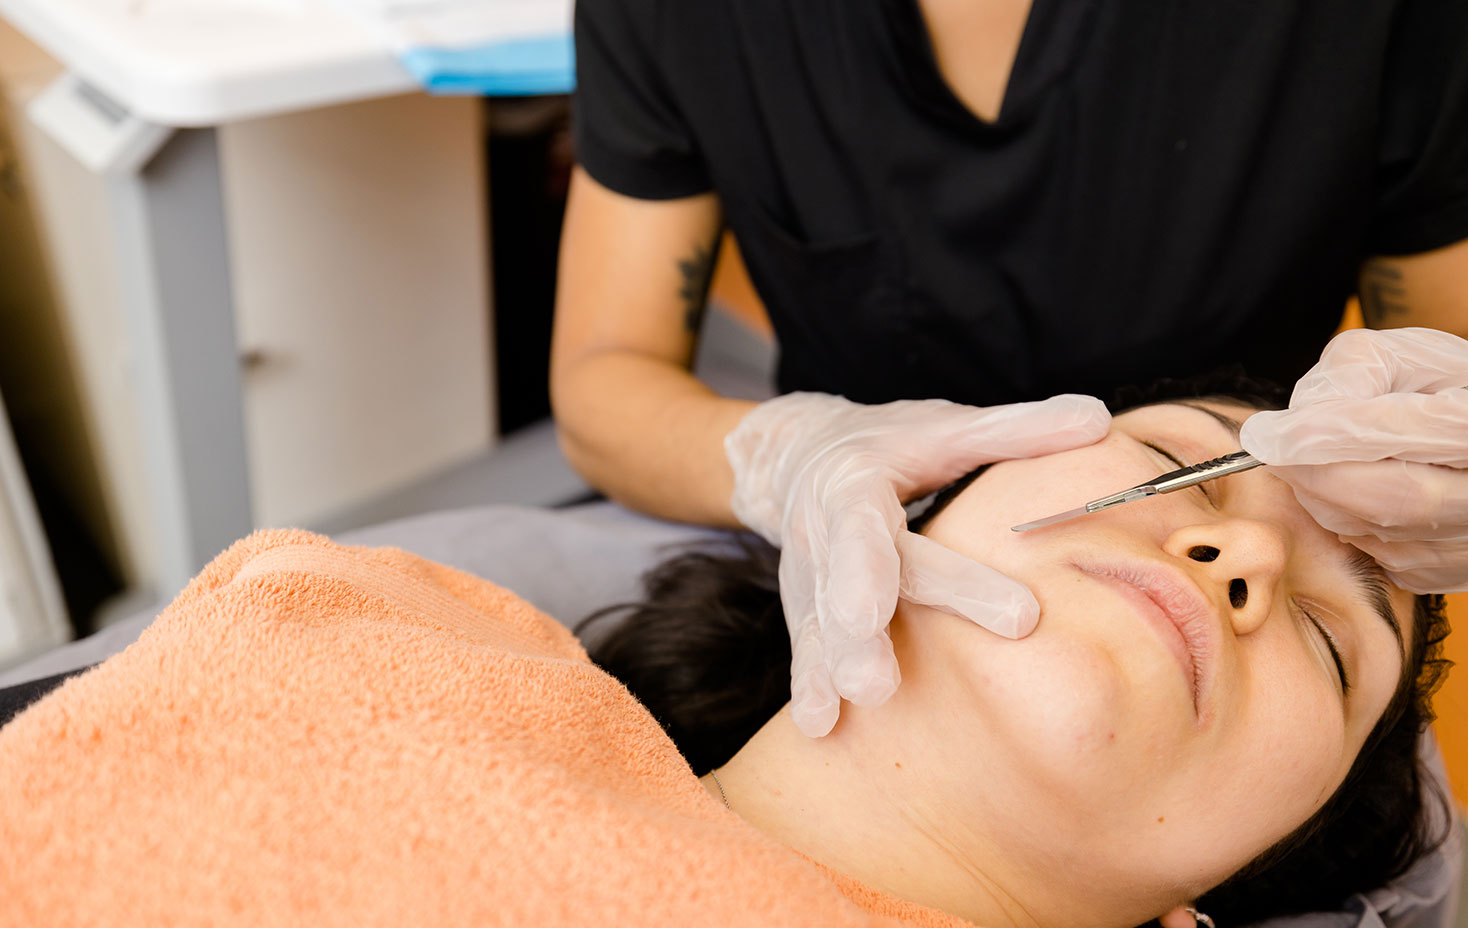 A Dermaplane treatment at Hello Laser Skin and Body Medspa can take your skincare routine to the next level.